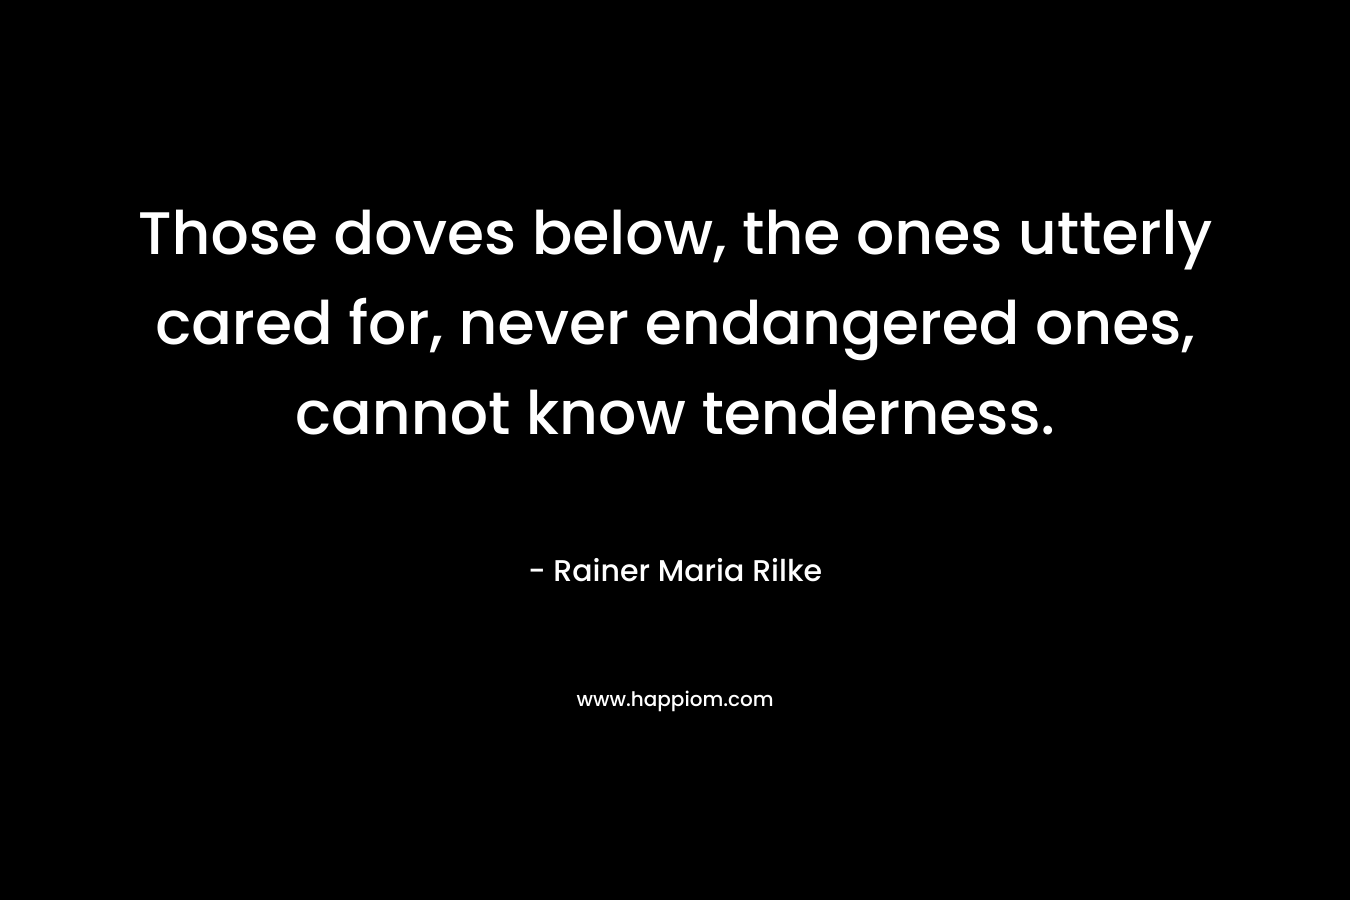 Those doves below, the ones utterly cared for, never endangered ones, cannot know tenderness. – Rainer Maria Rilke